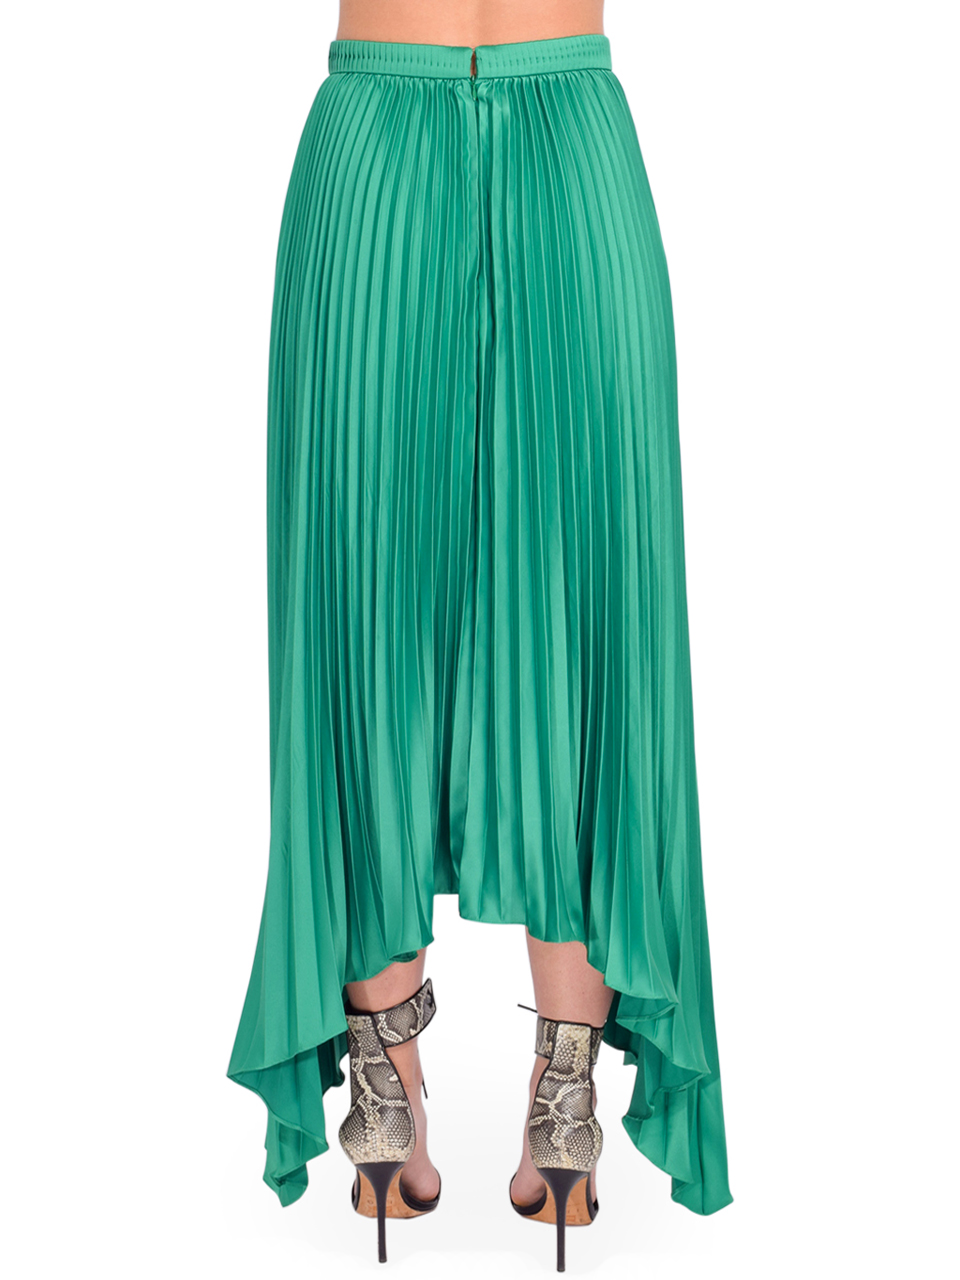 AMUR Olly Olana Pleated Midi Skirt in Green Side View 